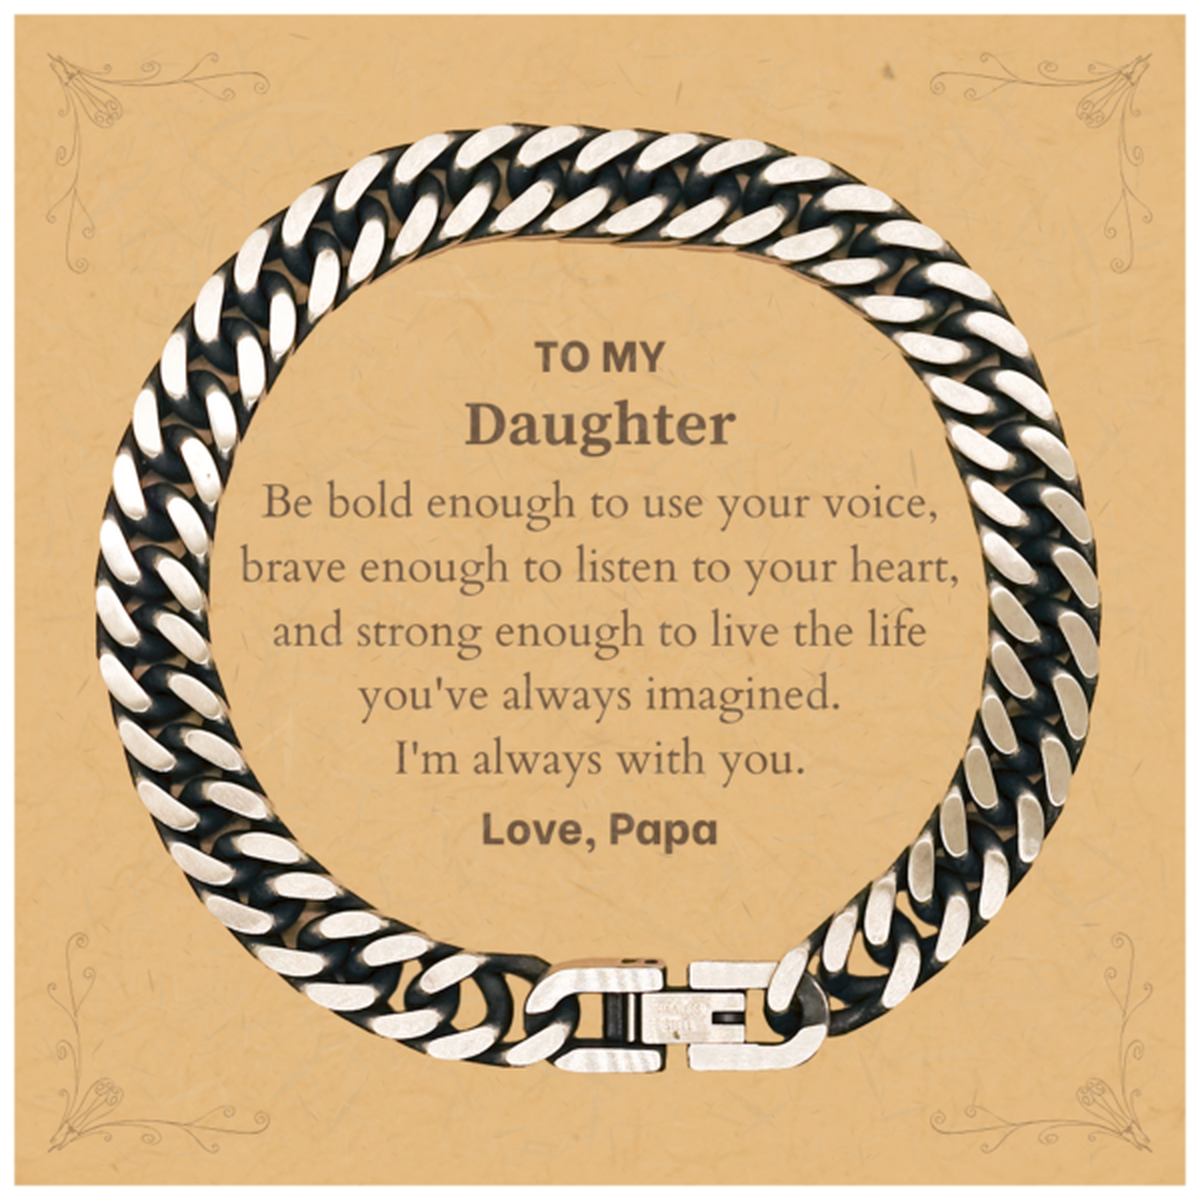 Keepsake Daughter Cuban Link Chain Bracelet Gift Idea Graduation Christmas Birthday Daughter from Papa, Daughter Be bold enough to use your voice, brave enough to listen to your heart. Love, Papa